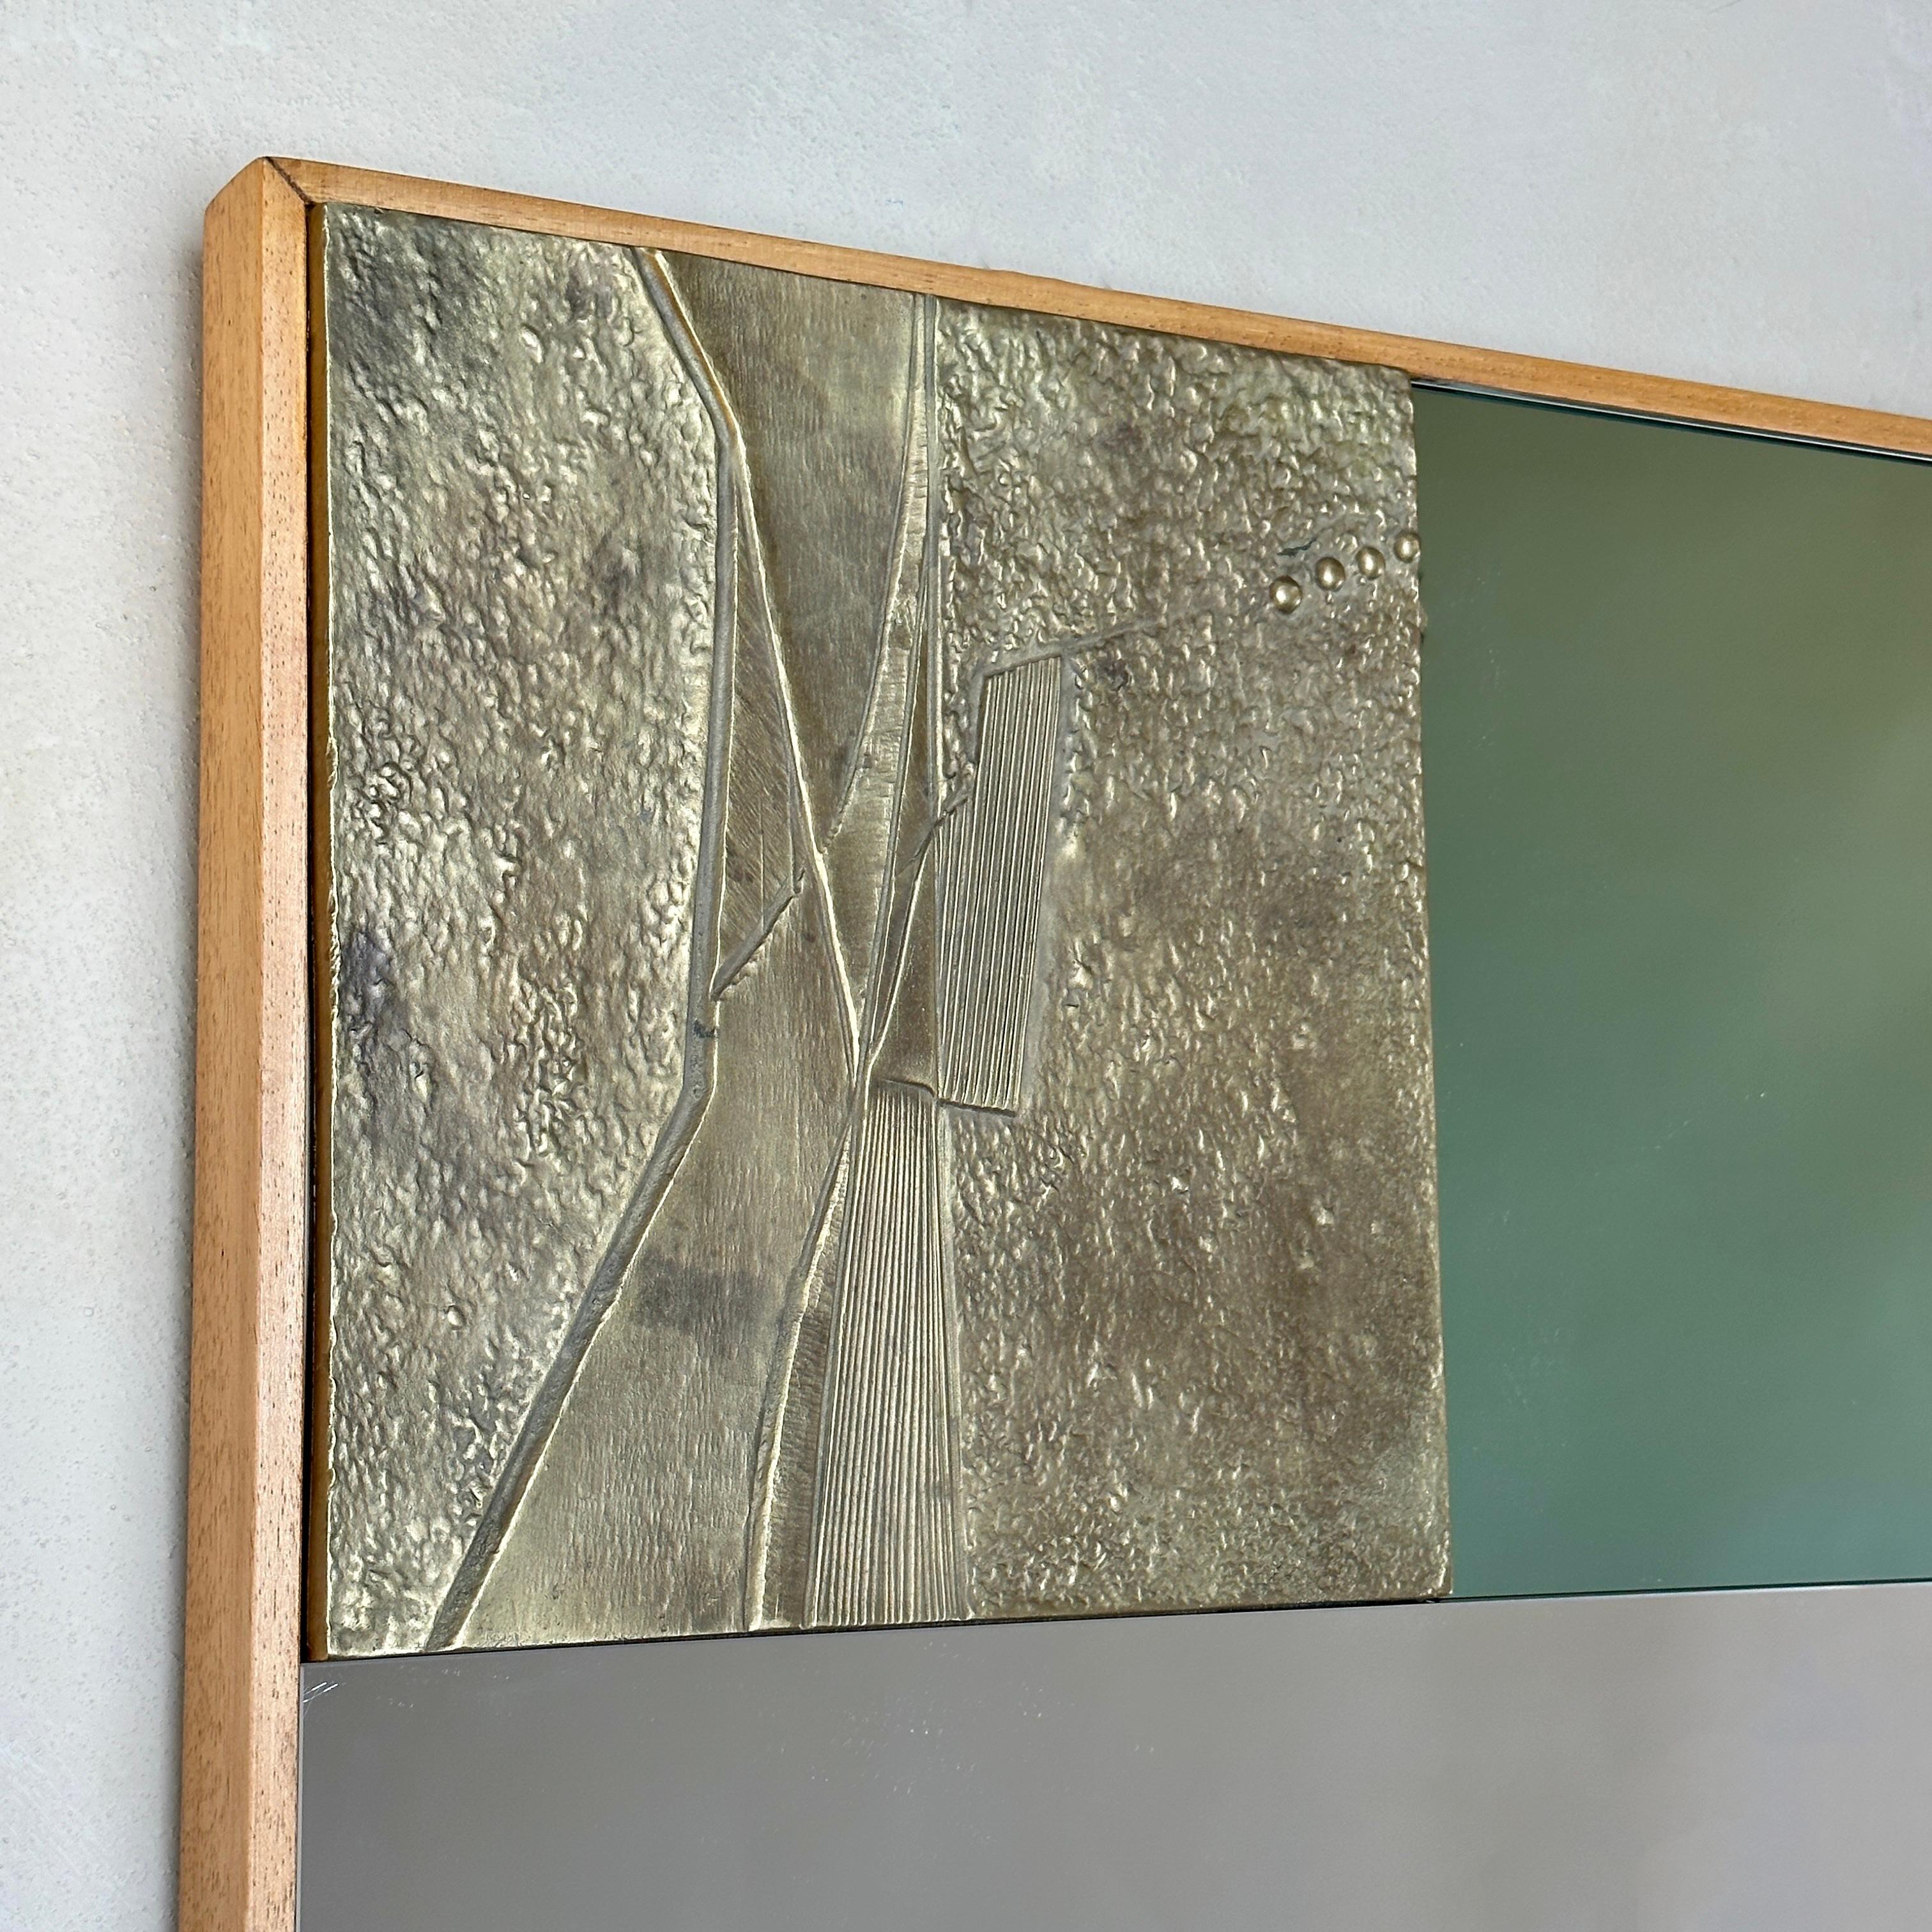 Stunning two tones mirror with sculptural bronze plaques with abstract designs and beech wood frame. It is supposed to be hanged only in a horizontal way.